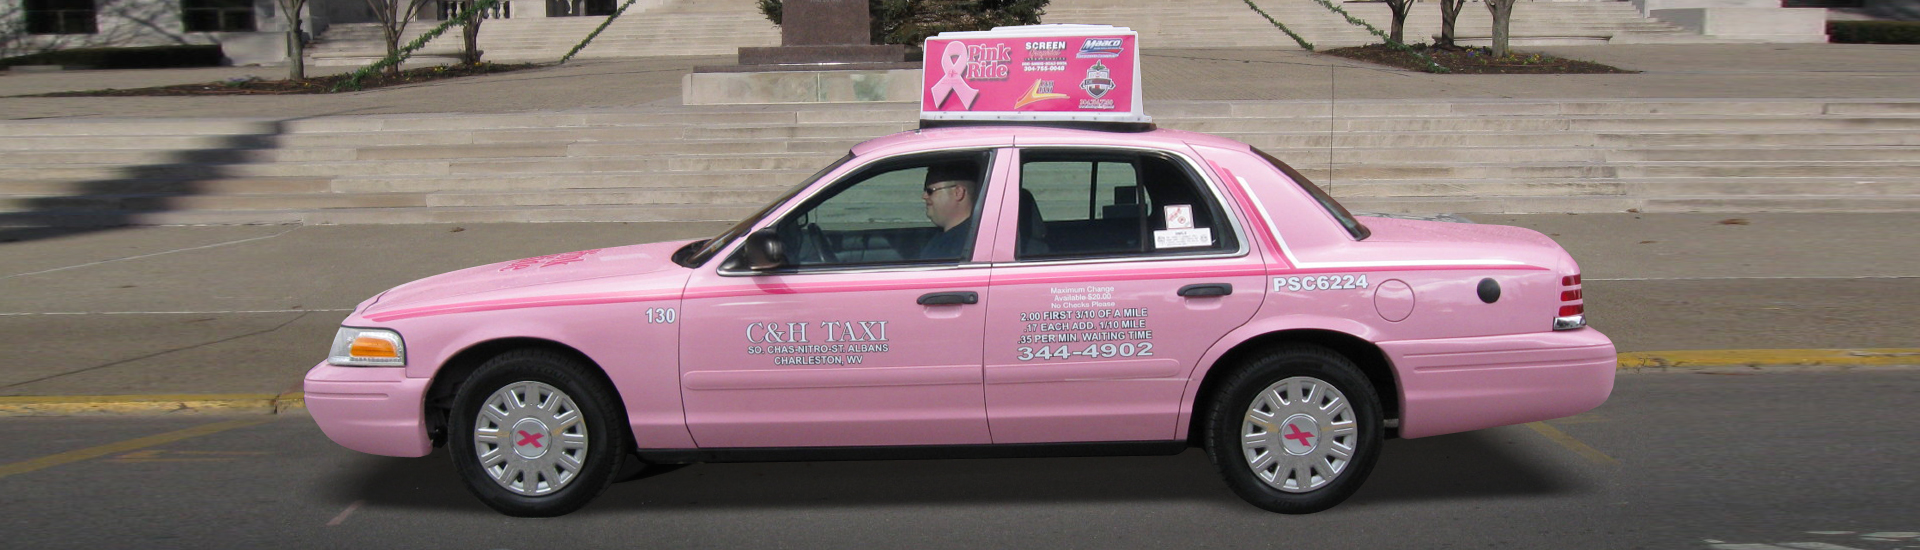 Pink ride TAxi - CH Taxi